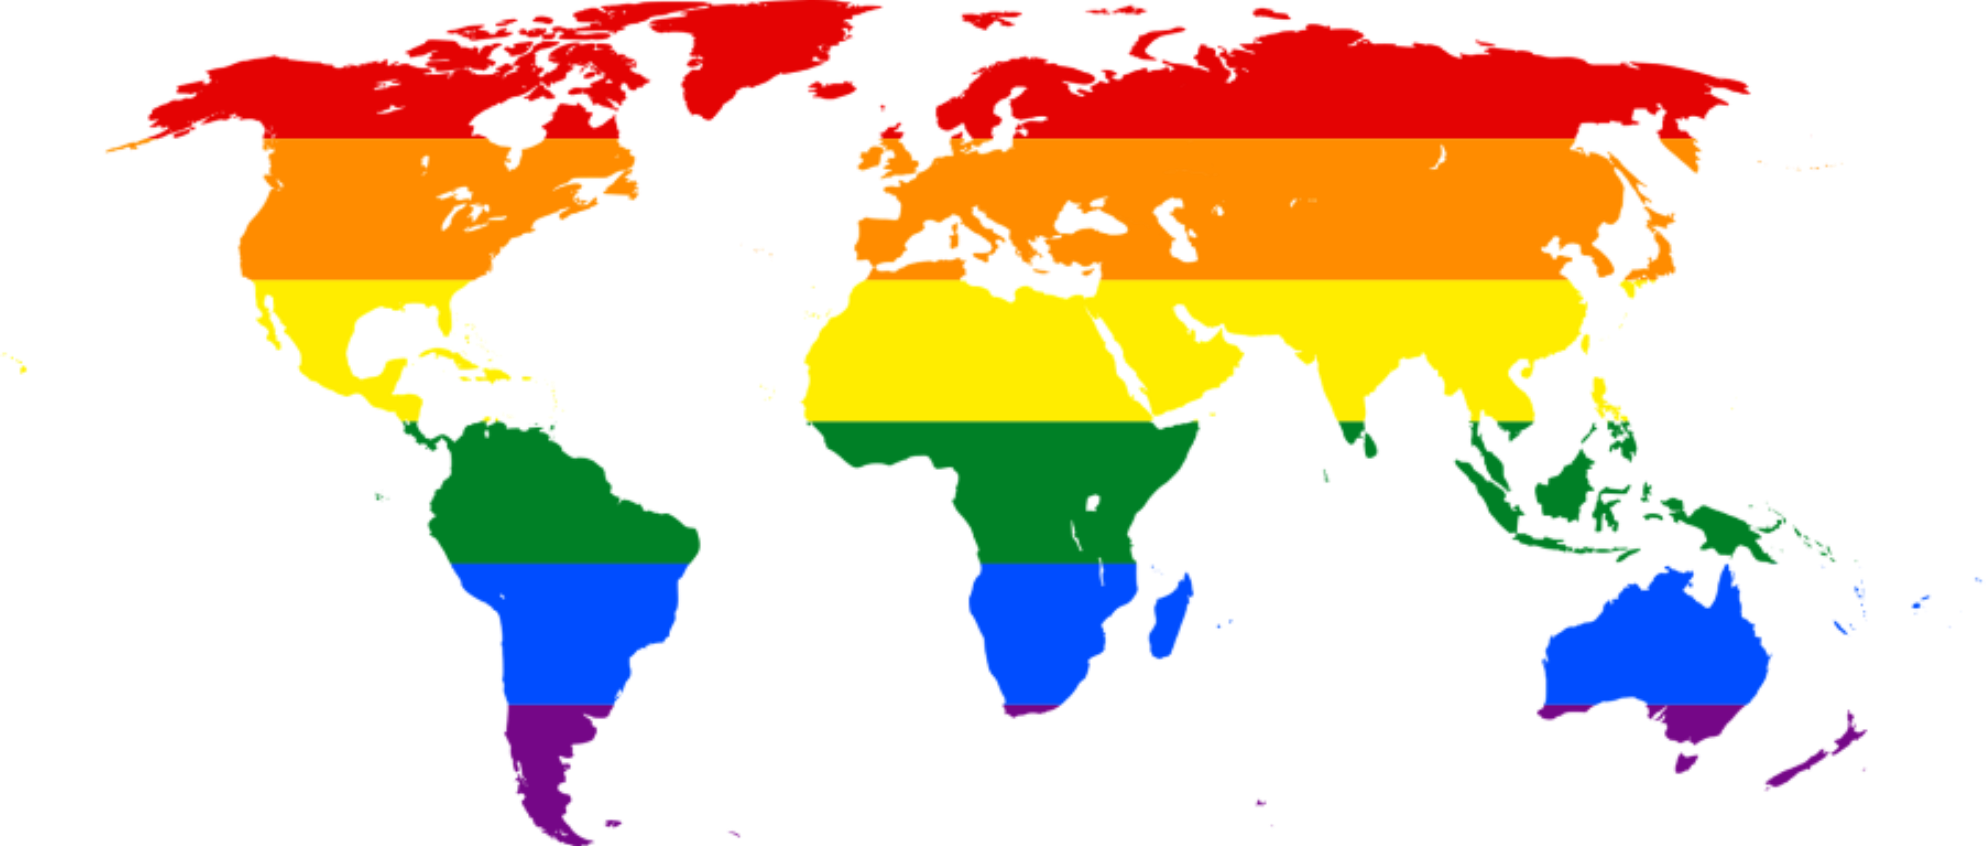 World Map with Rainbow color